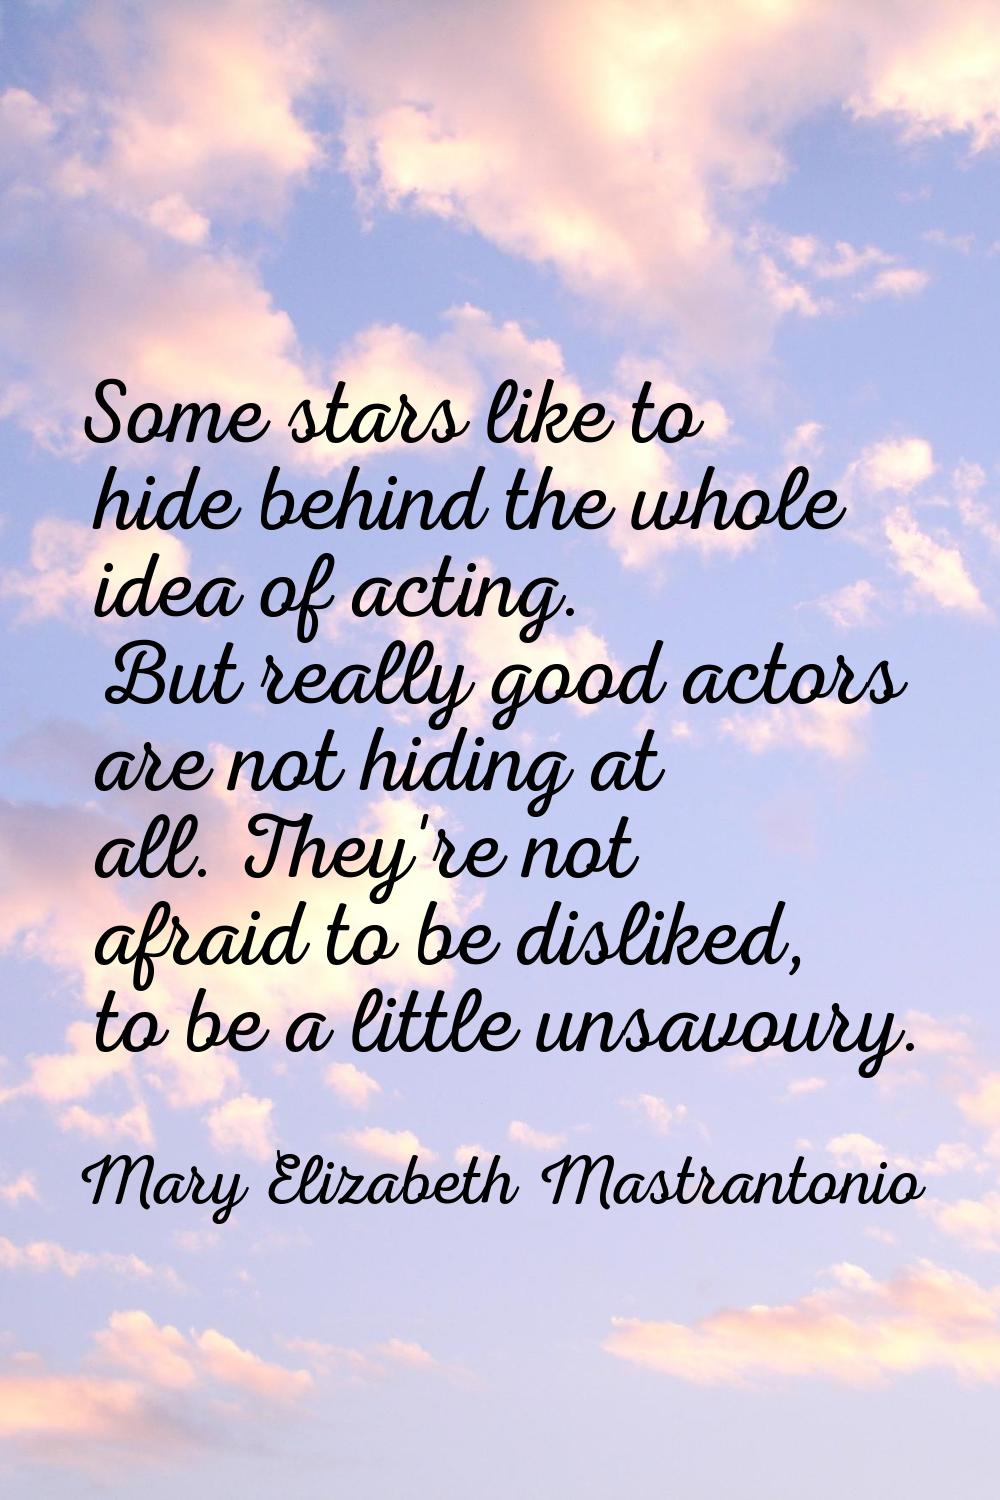 Some stars like to hide behind the whole idea of acting. But really good actors are not hiding at a